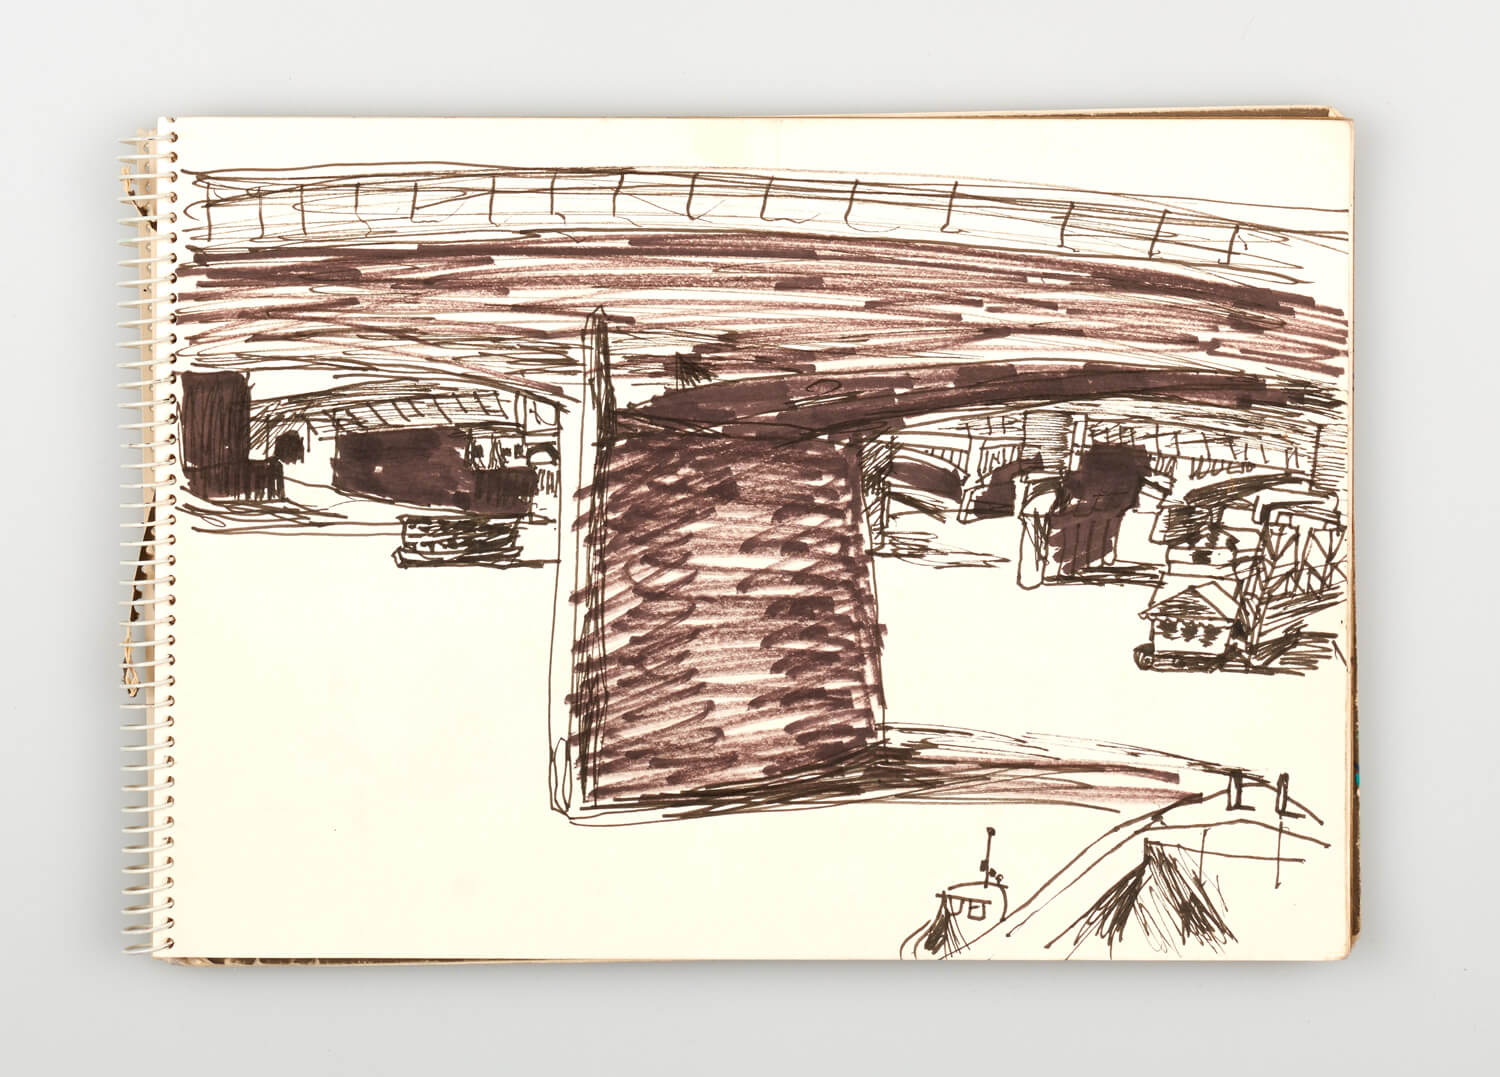 JB223 - Sketch for Bridges on the River Thames - 1992 - 21 x 30 cm - Pen and Ink on cartridge paper